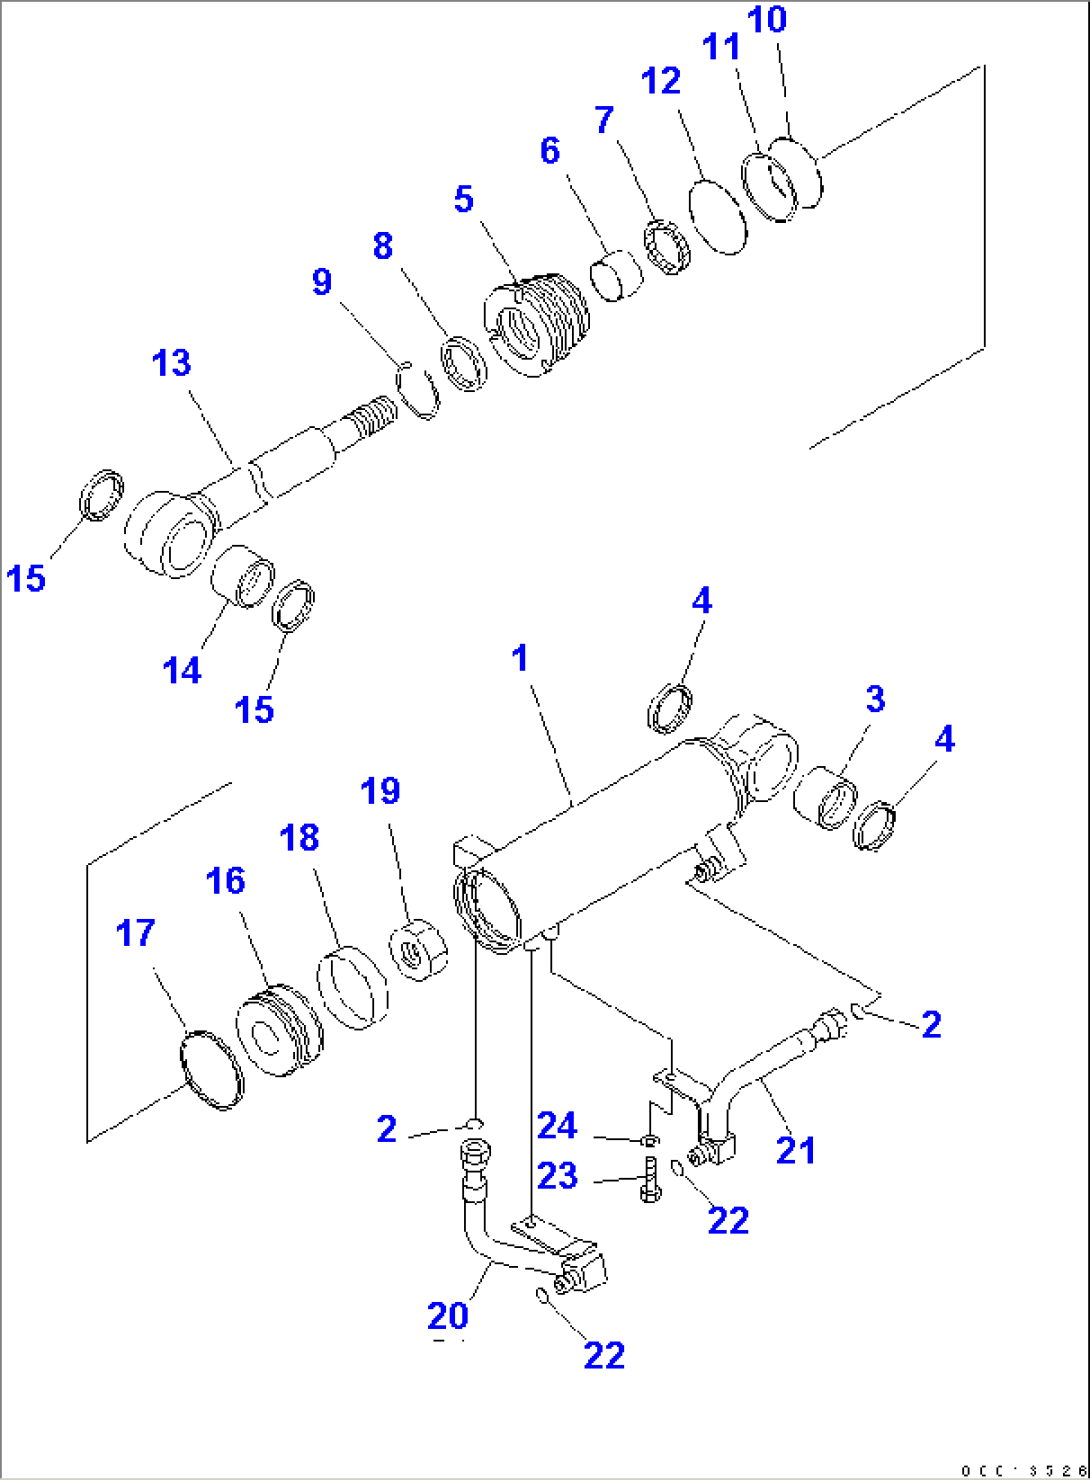 3-POINT HITCH CYLINDER